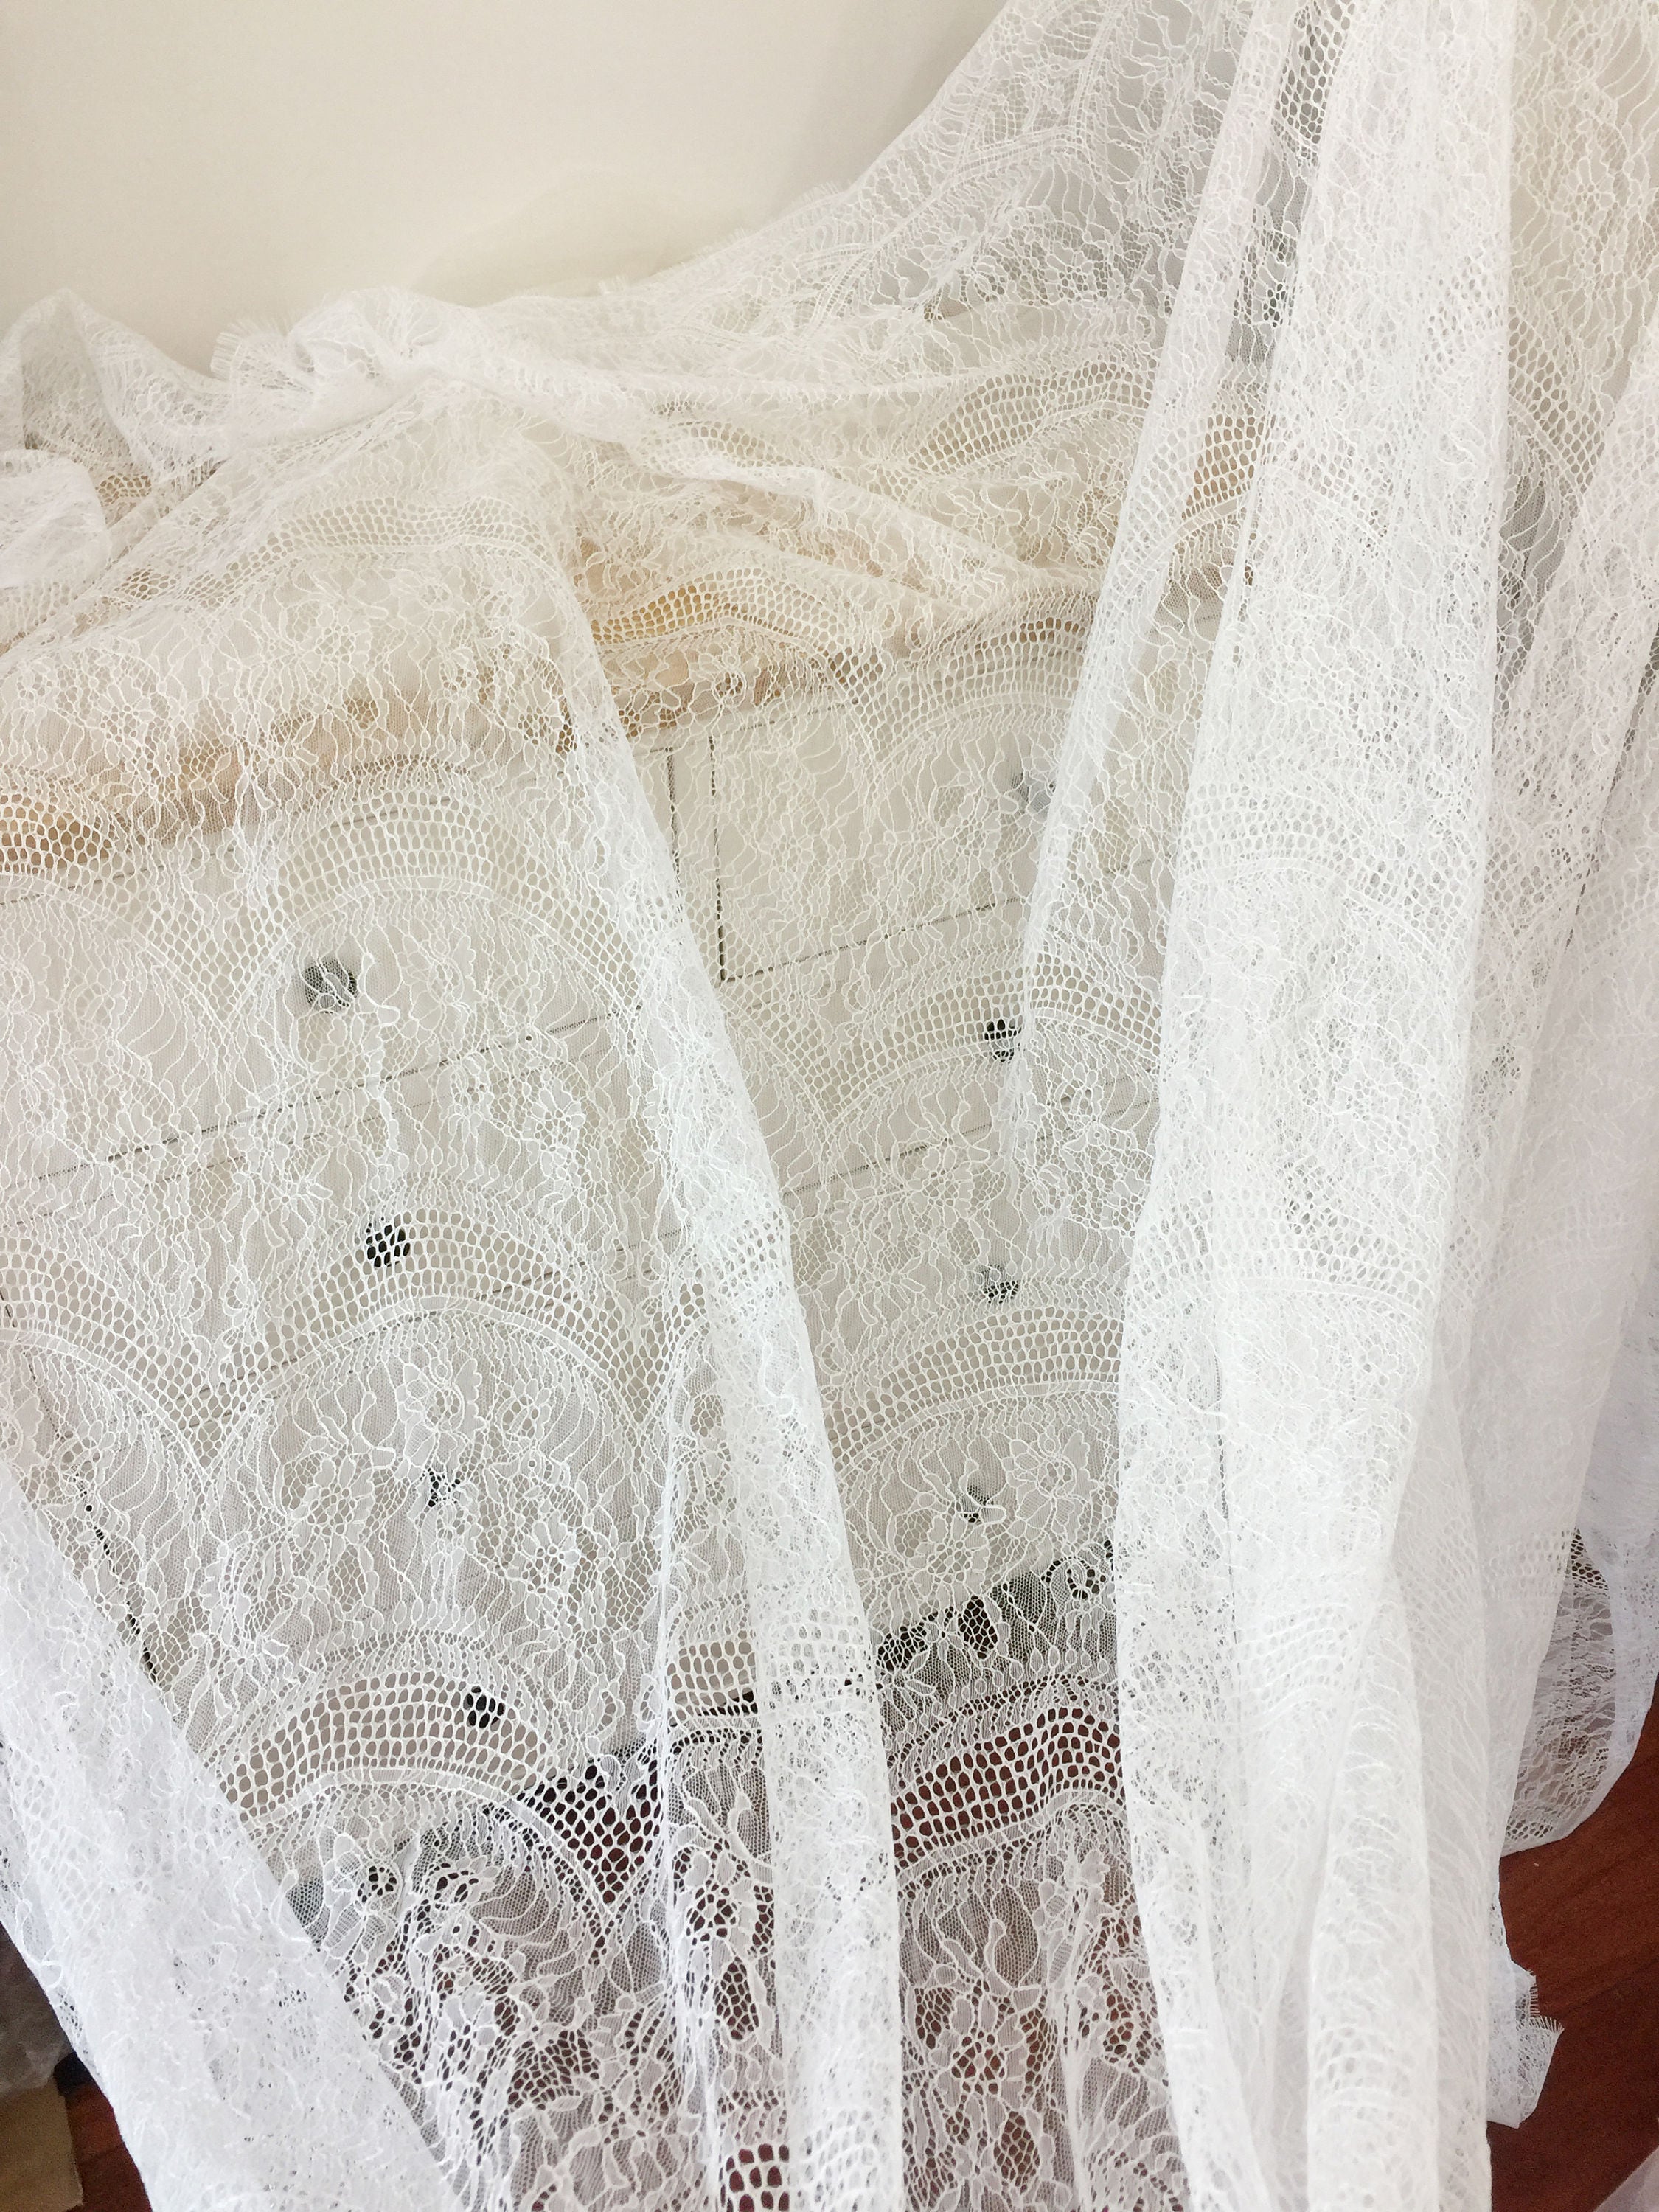 3 METER PIECE Bridal Chantilly Lace Fabric Lingerie Lace | Etsy